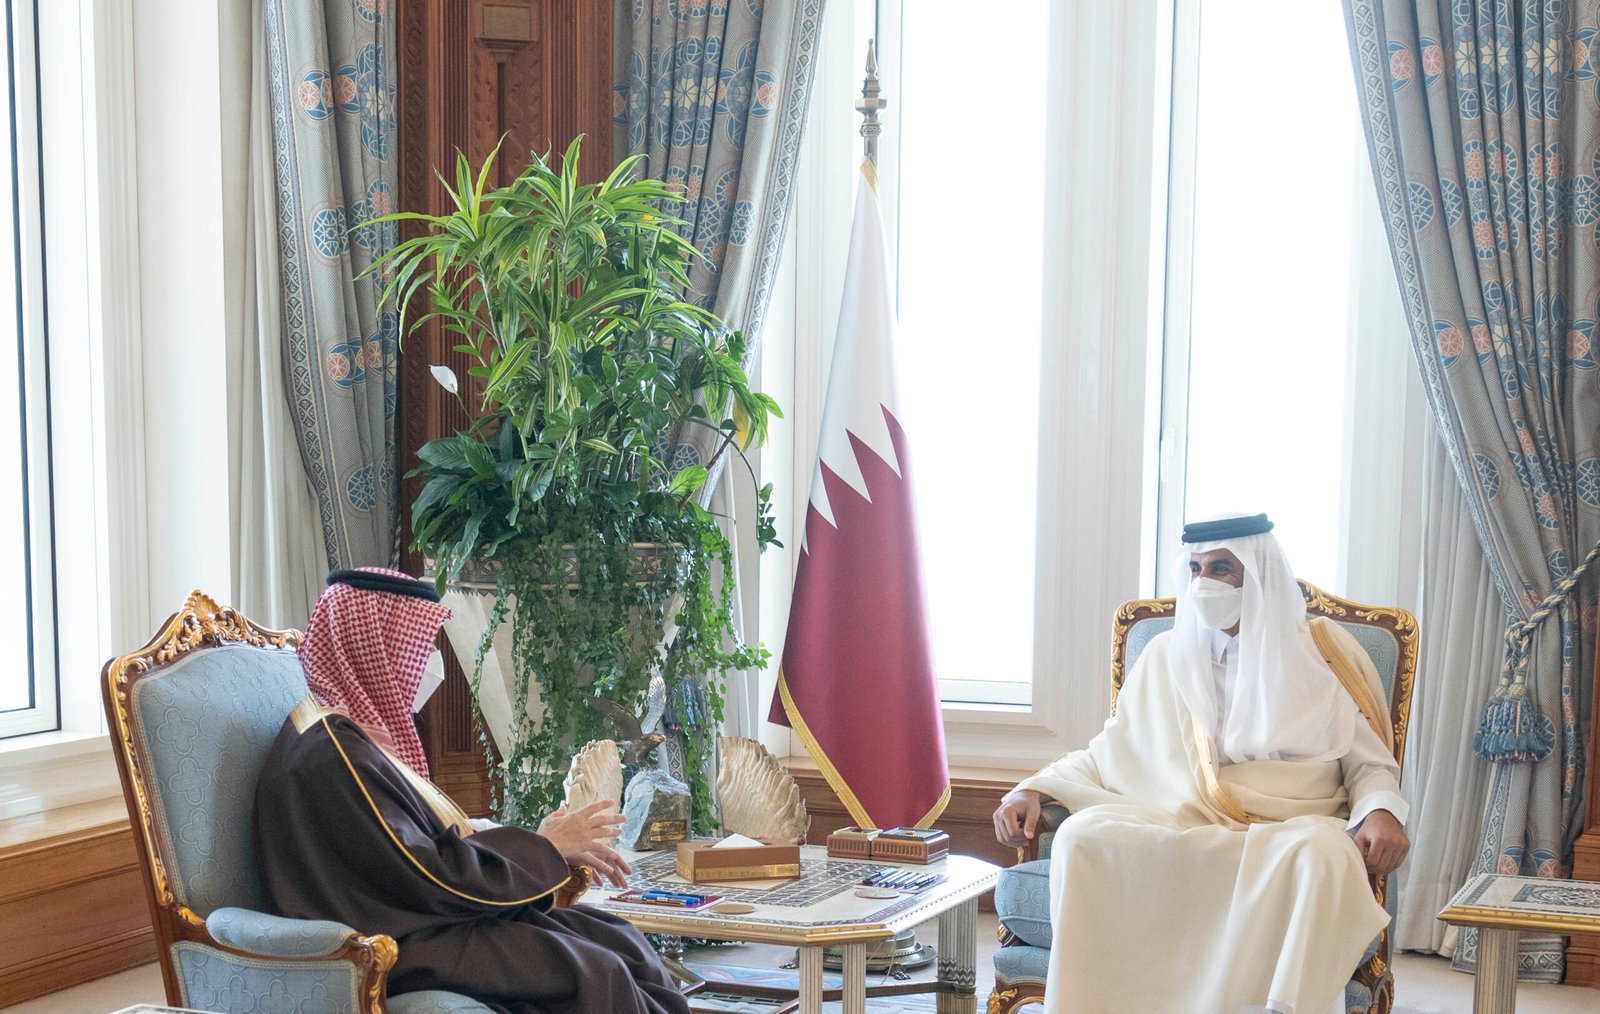 Saudi Arabia’s Foreign Minister Conveys Kingdom’s Ruler Message to Amir of Qatar and Meets Qatar’s Counterpart